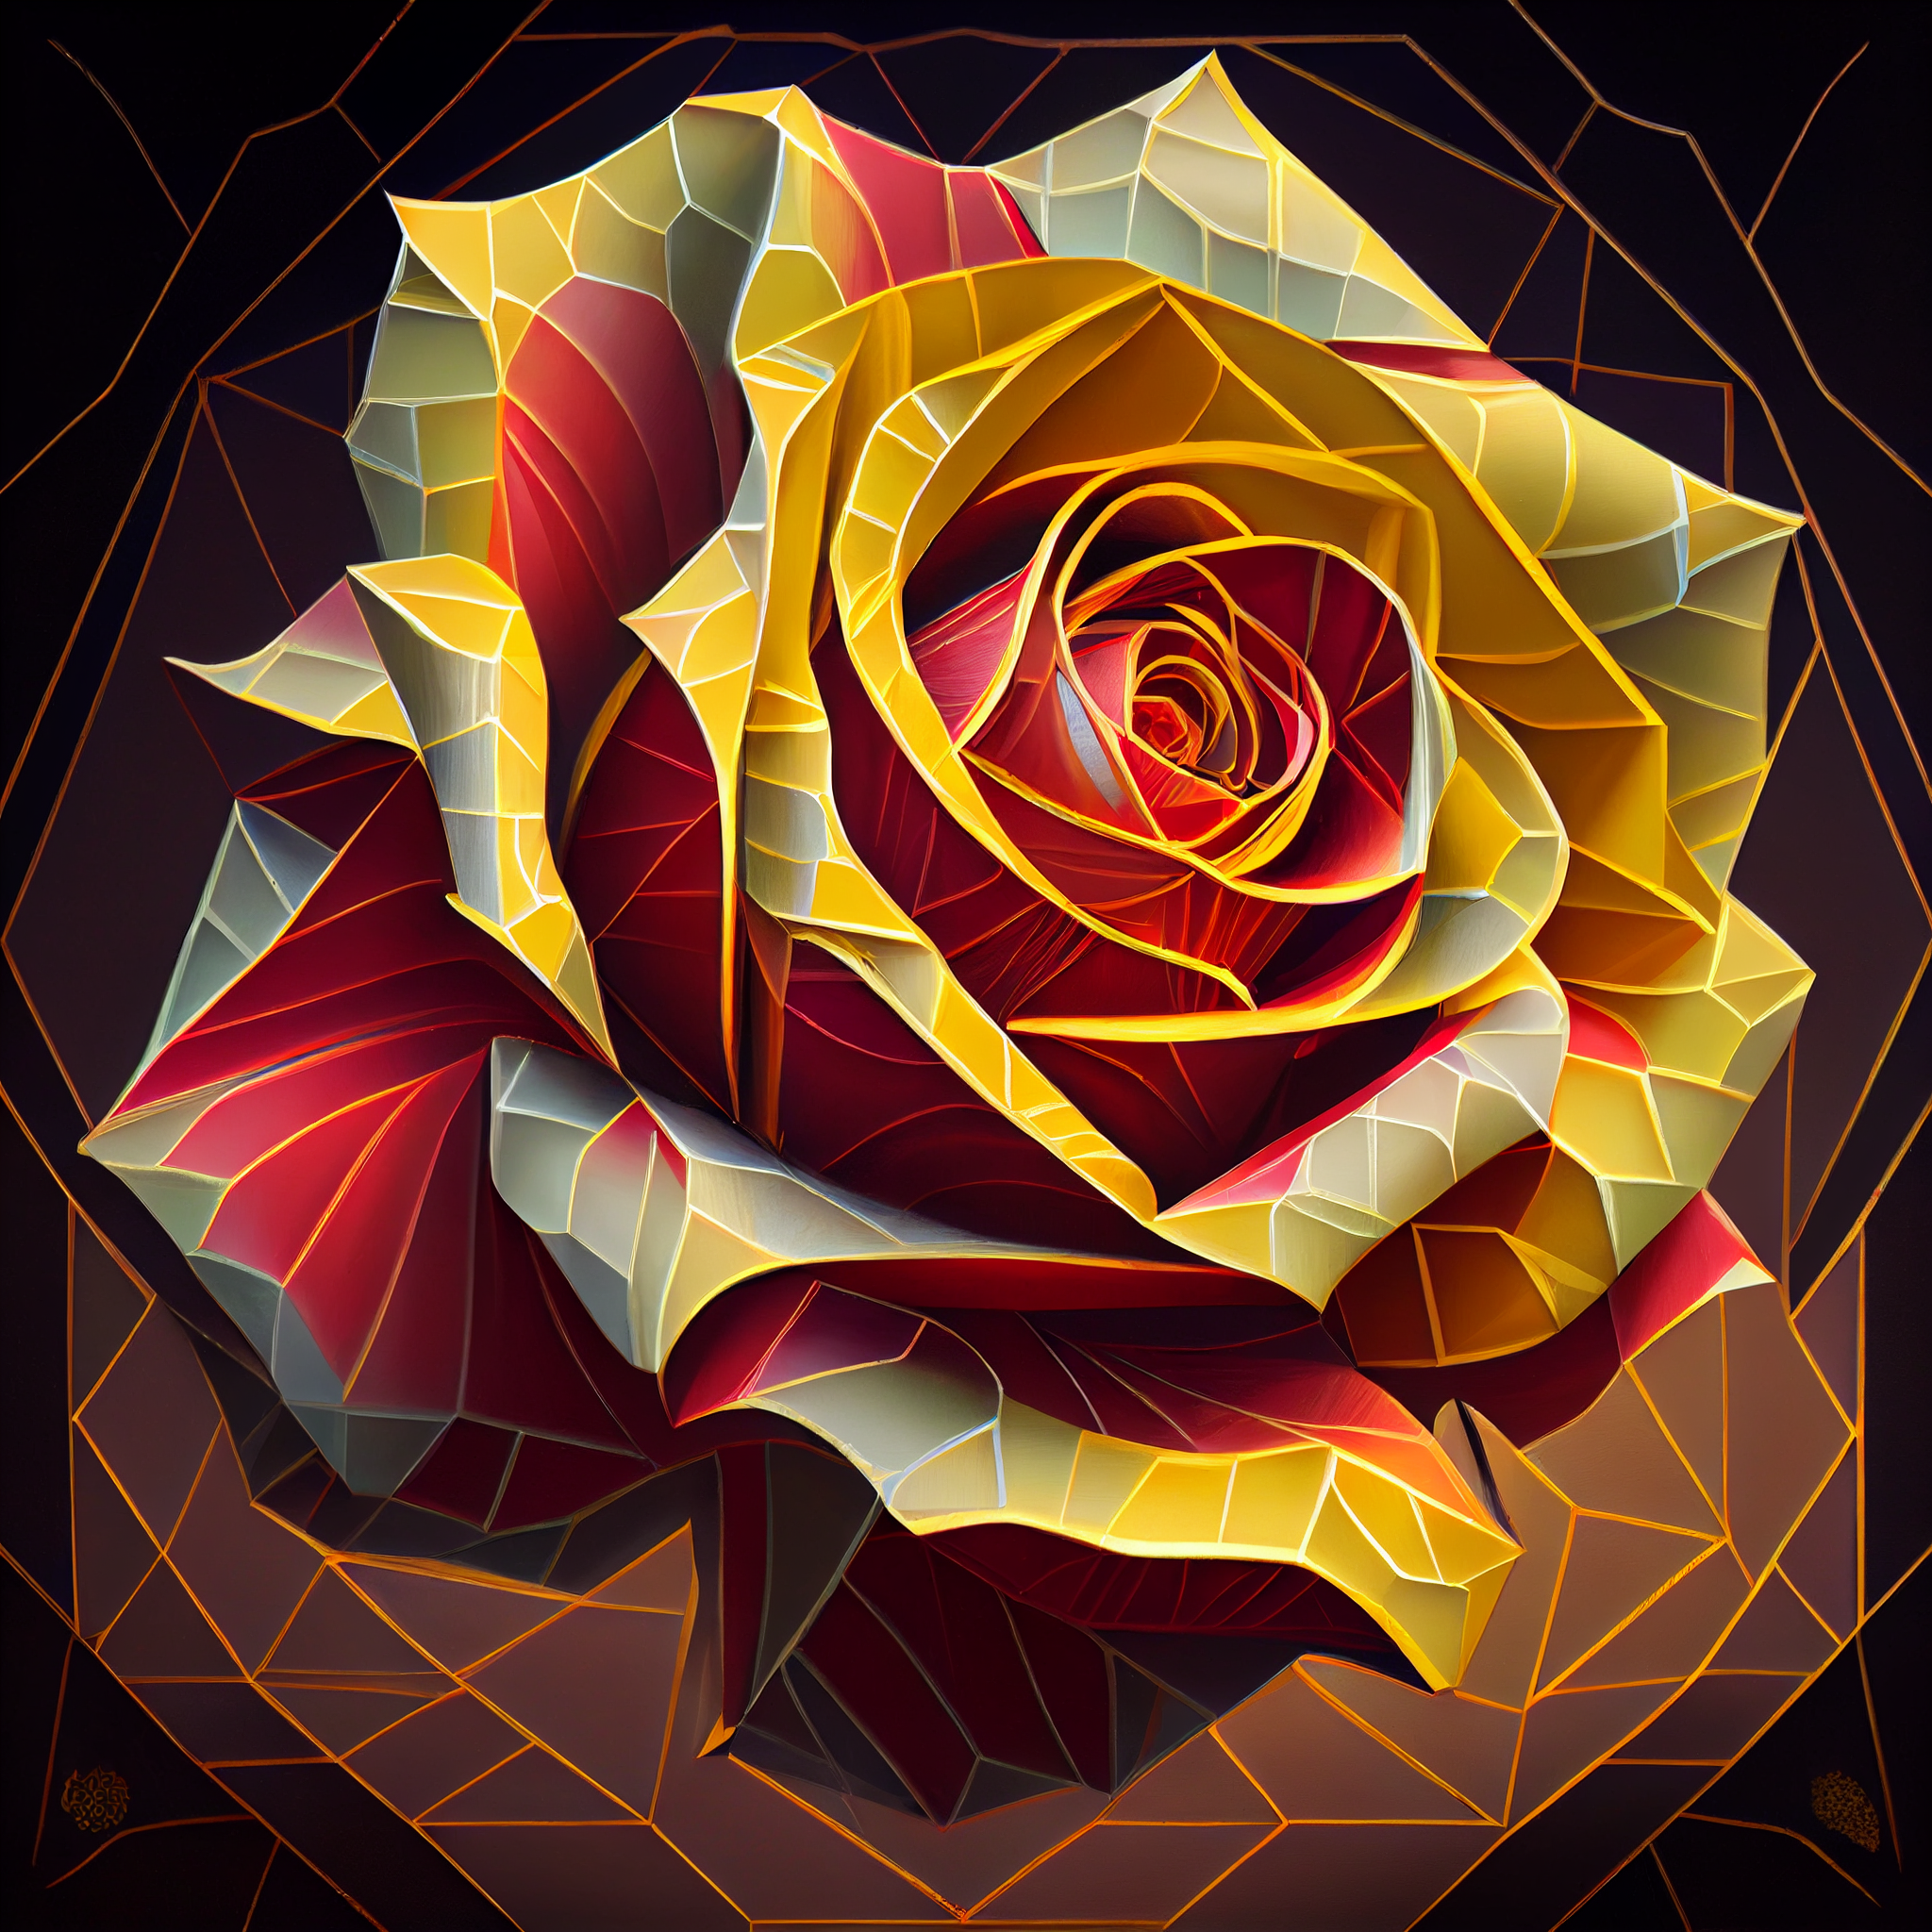 Radiant Blooms: A Geometric Art Print Featuring Vibrant Red and Yellow Roses